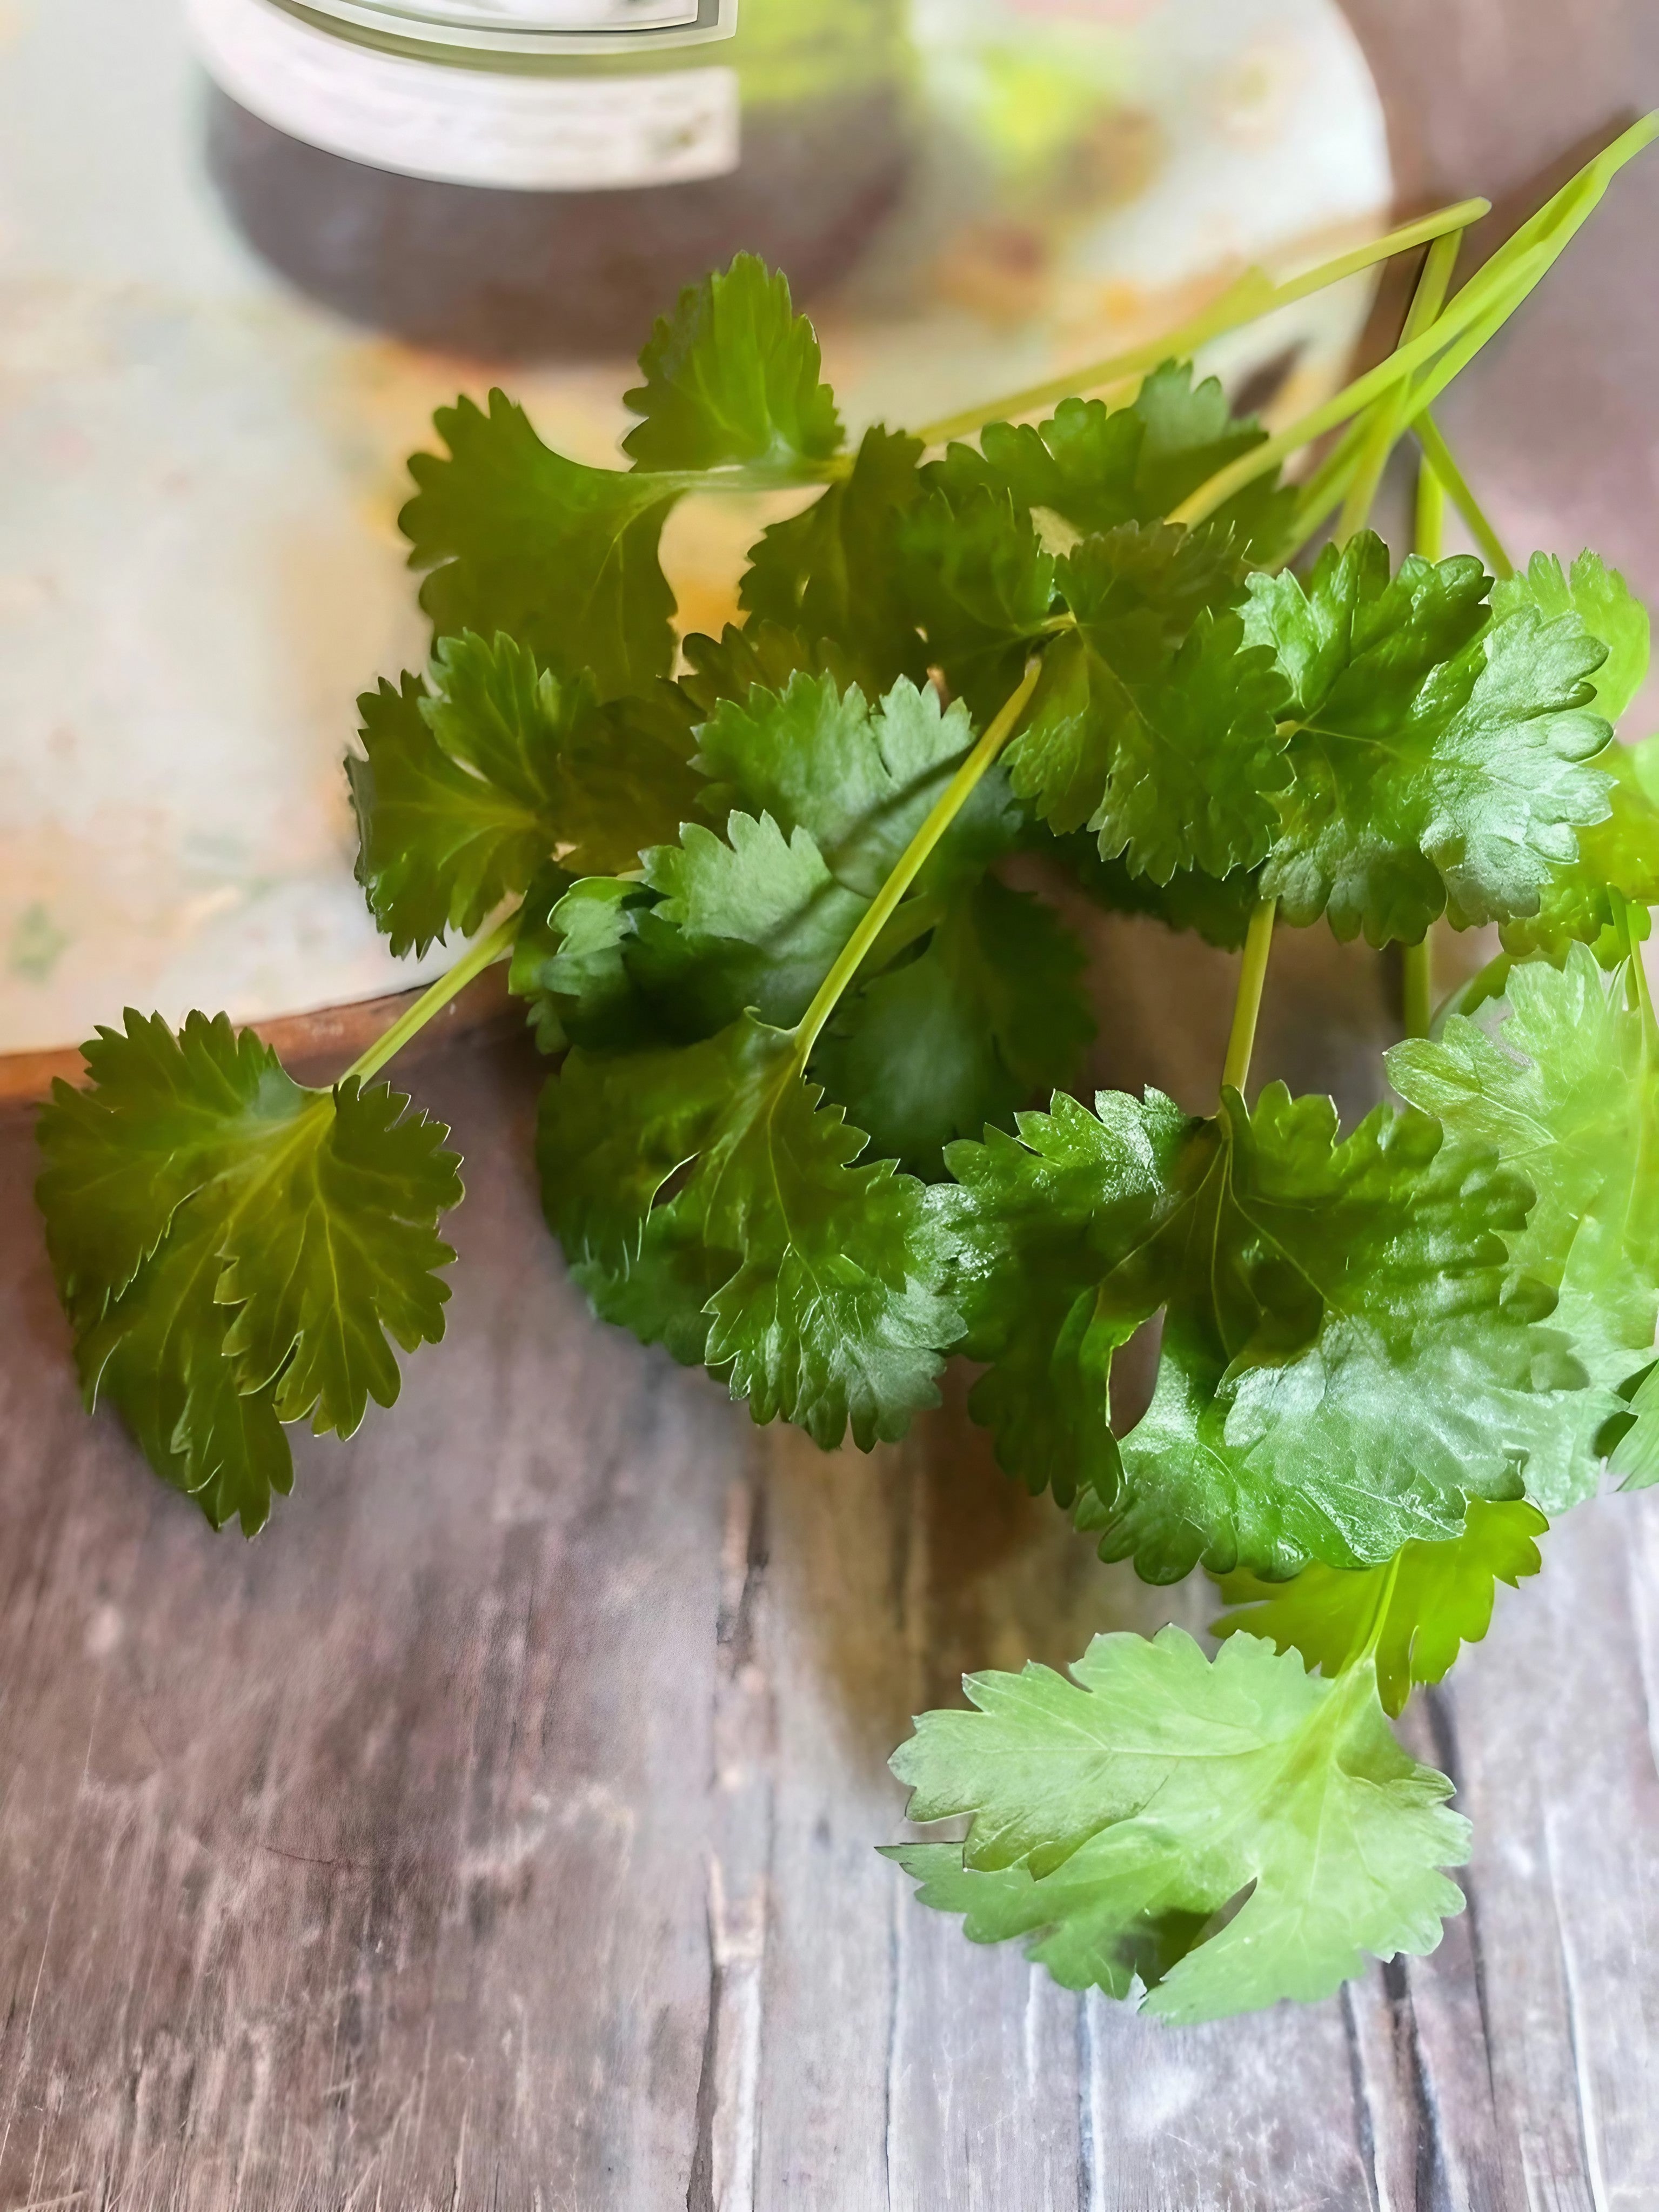 Coriander leaves positioned next to a bottle of wine for a culinary presentation